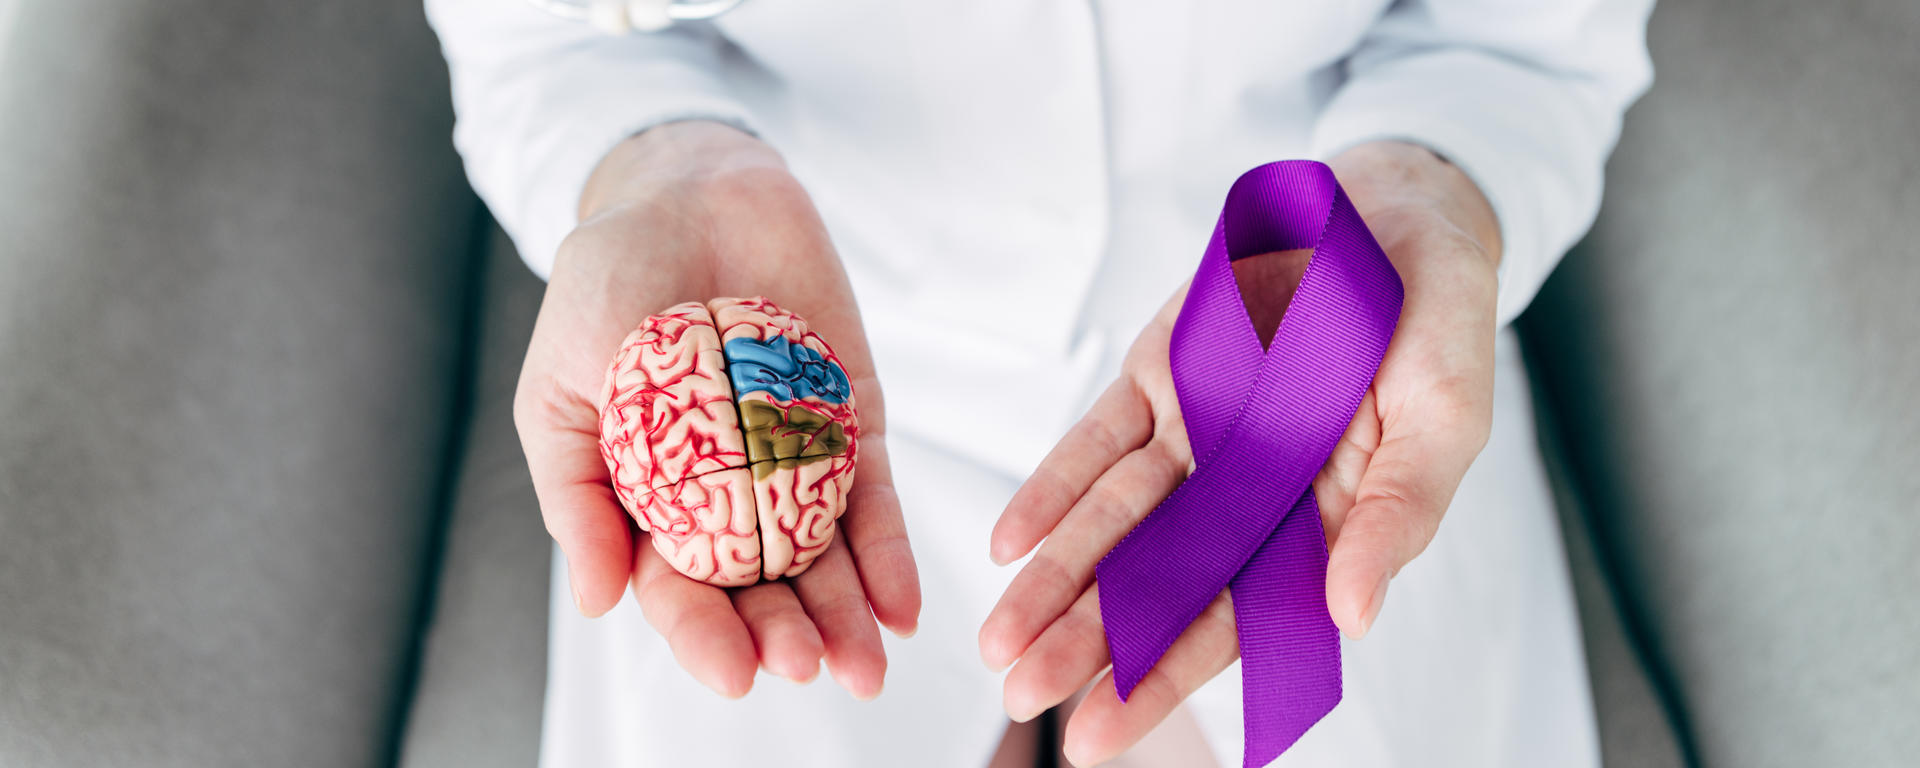 hands holding a toy brain and purple ribbon